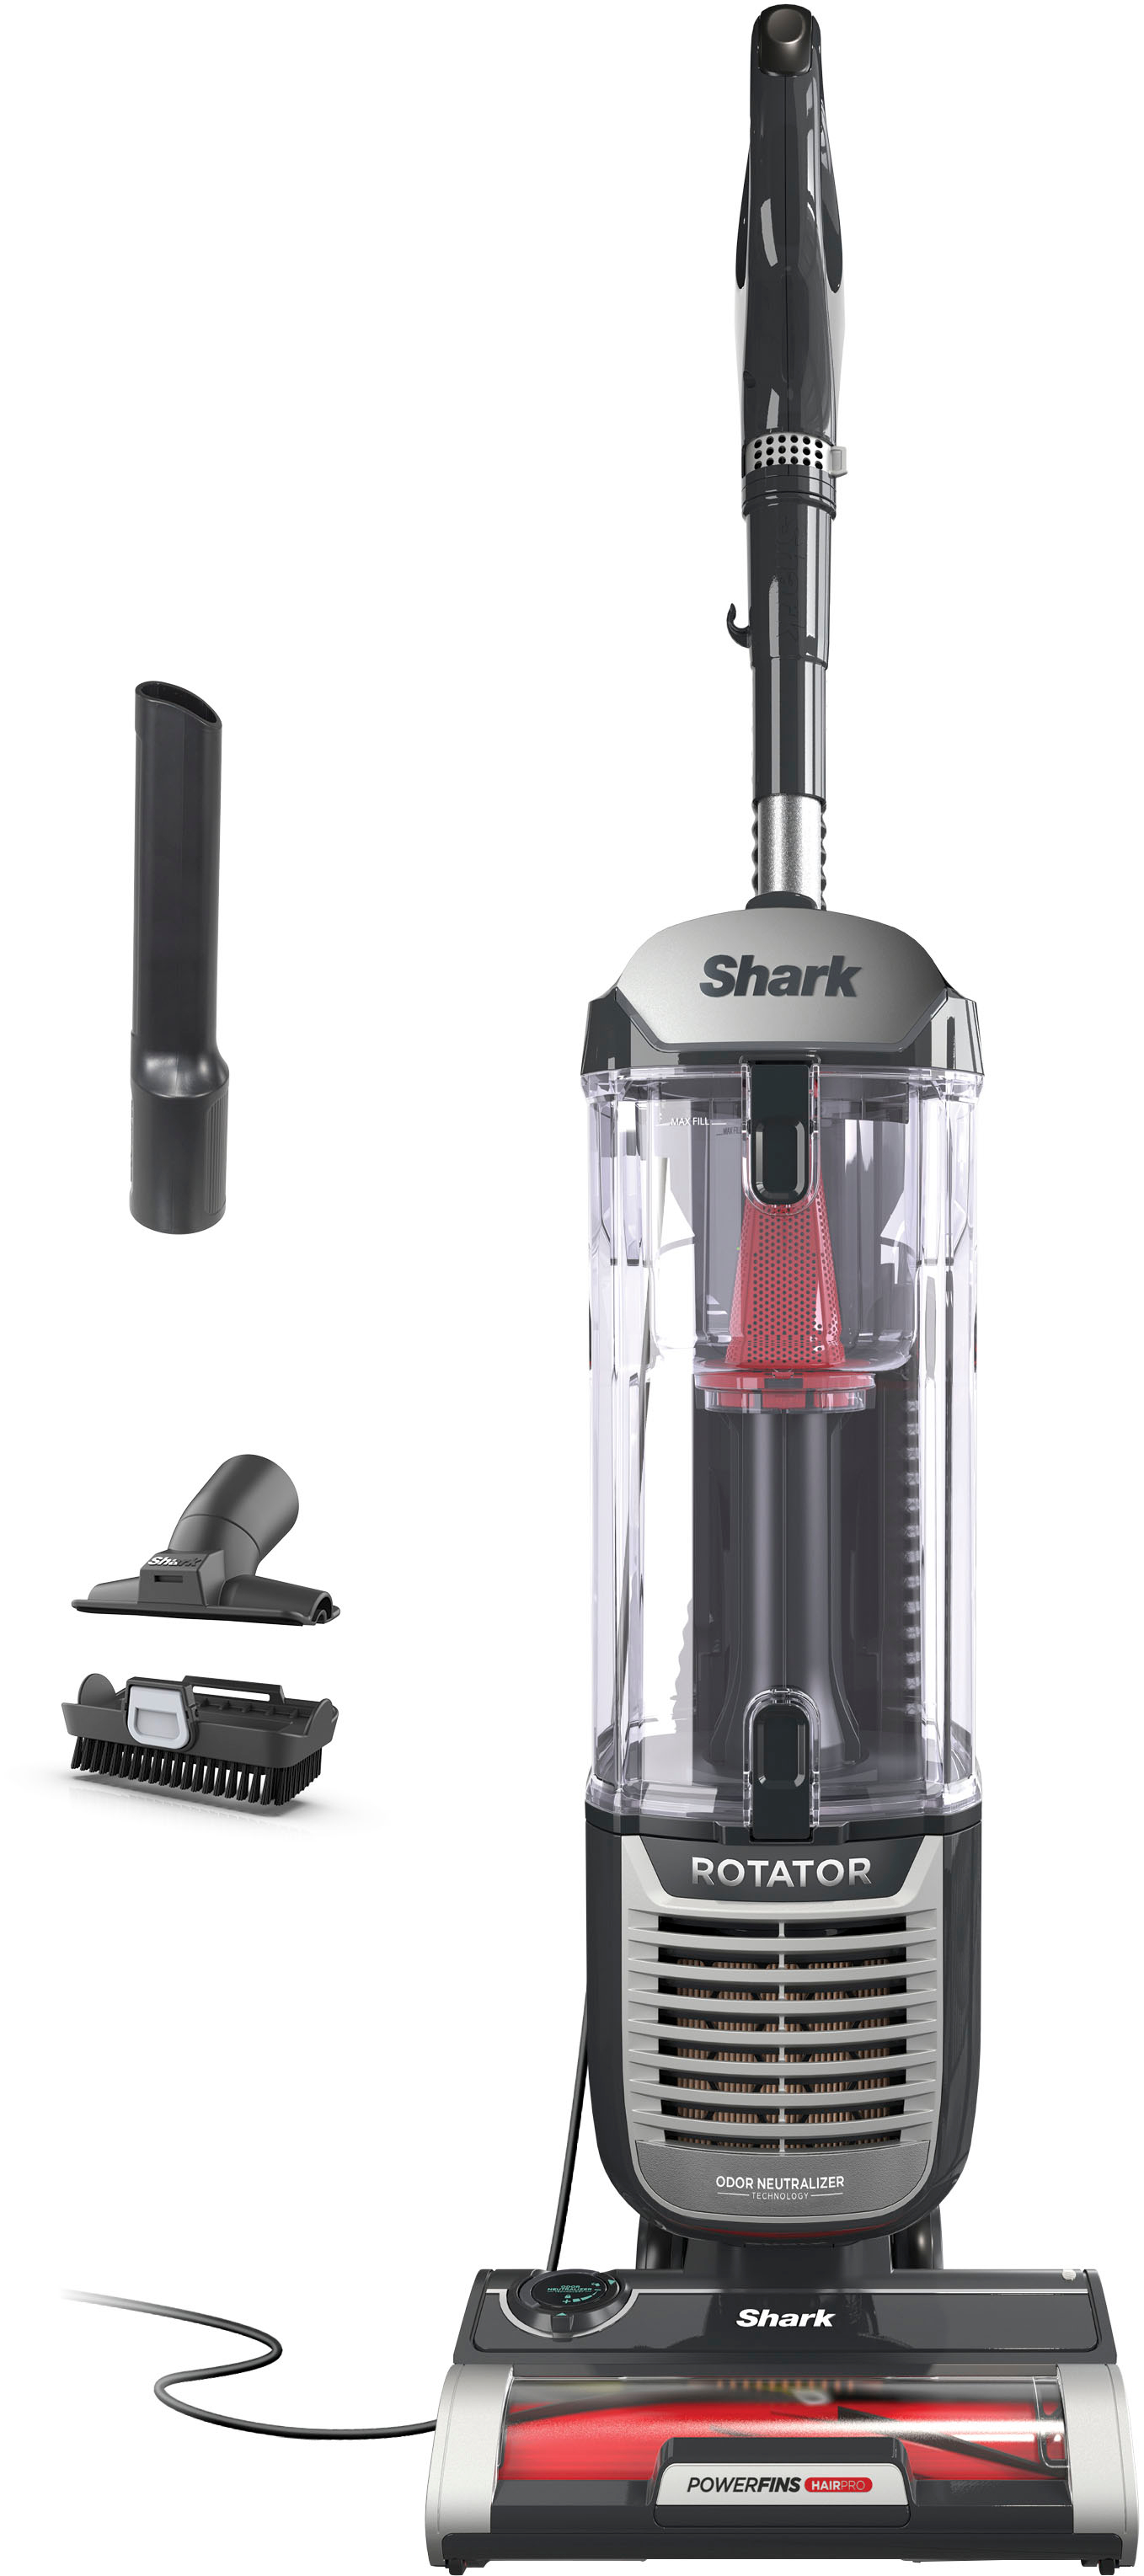 Crevice Tool and Dust Brush for Shark Navigator Lift-Away Vacuum Cleaner, Fits, Gray